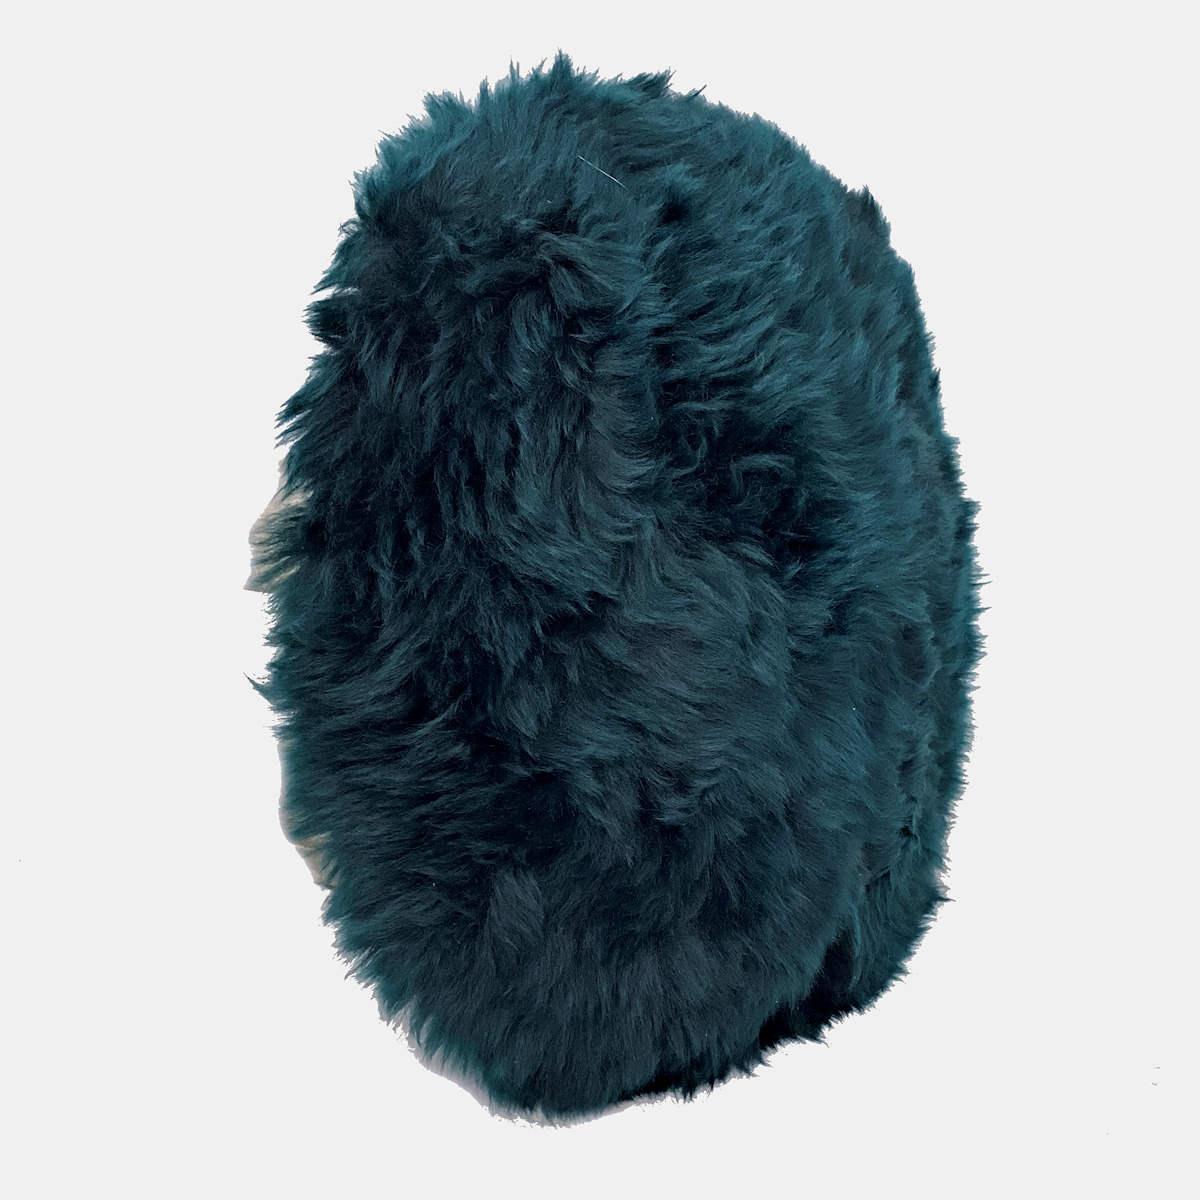 Introduce rich and irresistible textures into an interior with this sumptuous round fur pillow. Featuring a thick and pure wool pile with superior silky softness, this collection of fur pillows is hand-crafted from beautiful high-quality New Zealand